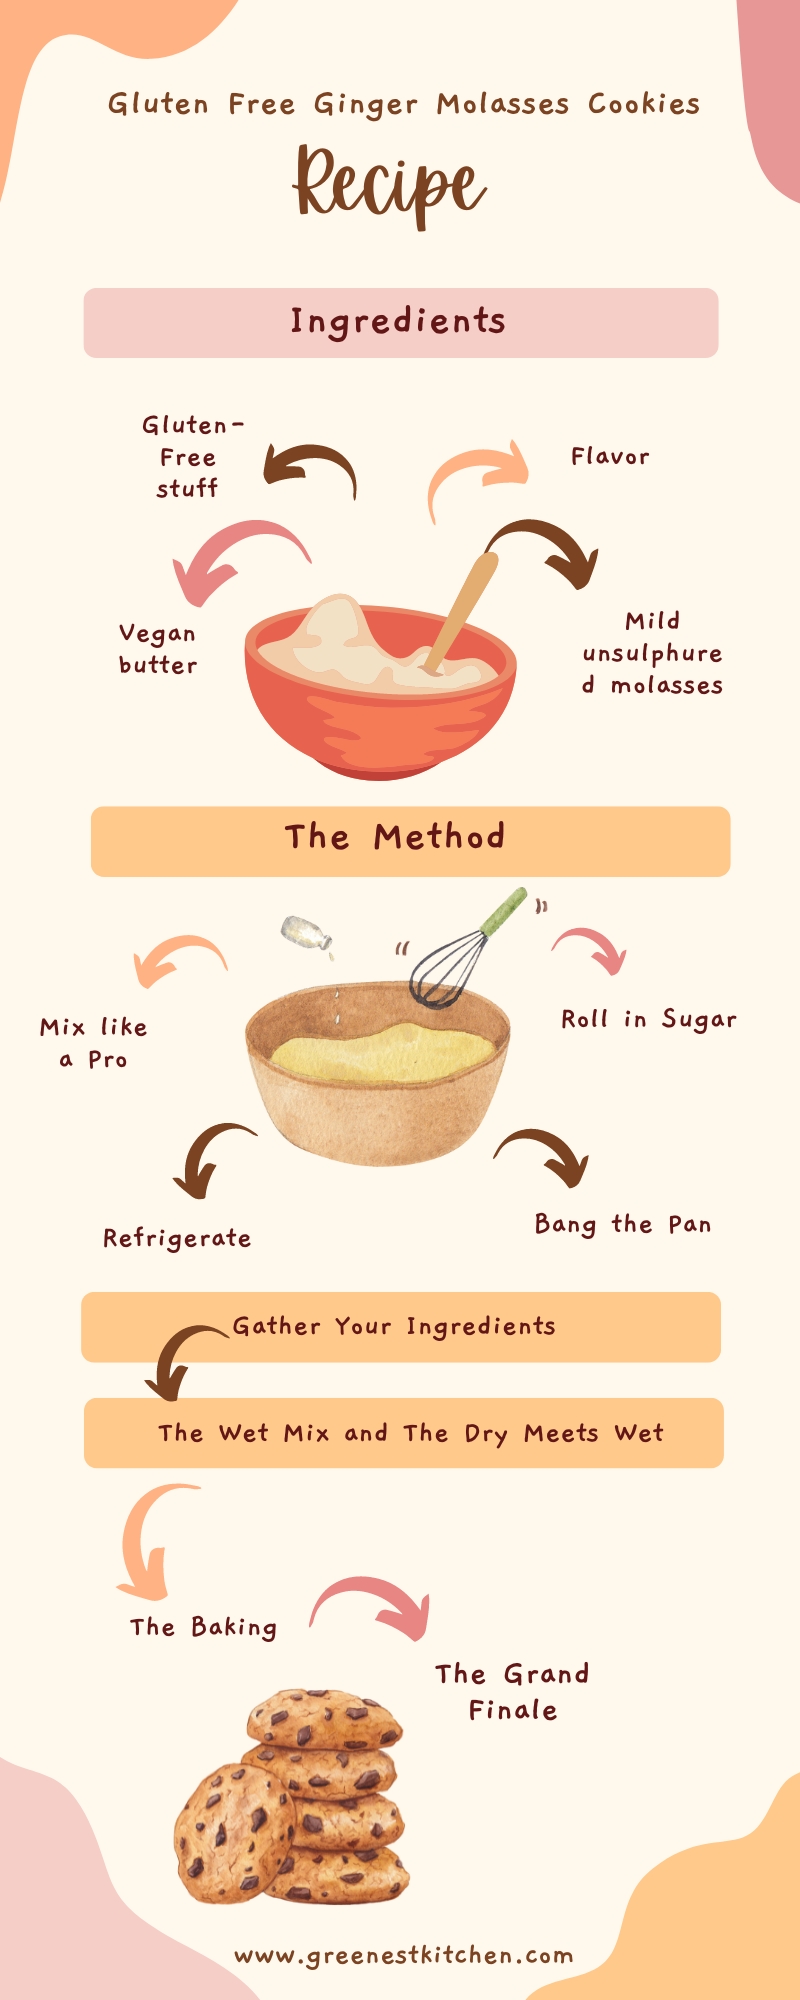 Gluten Free Ginger Molasses Cookies infographic